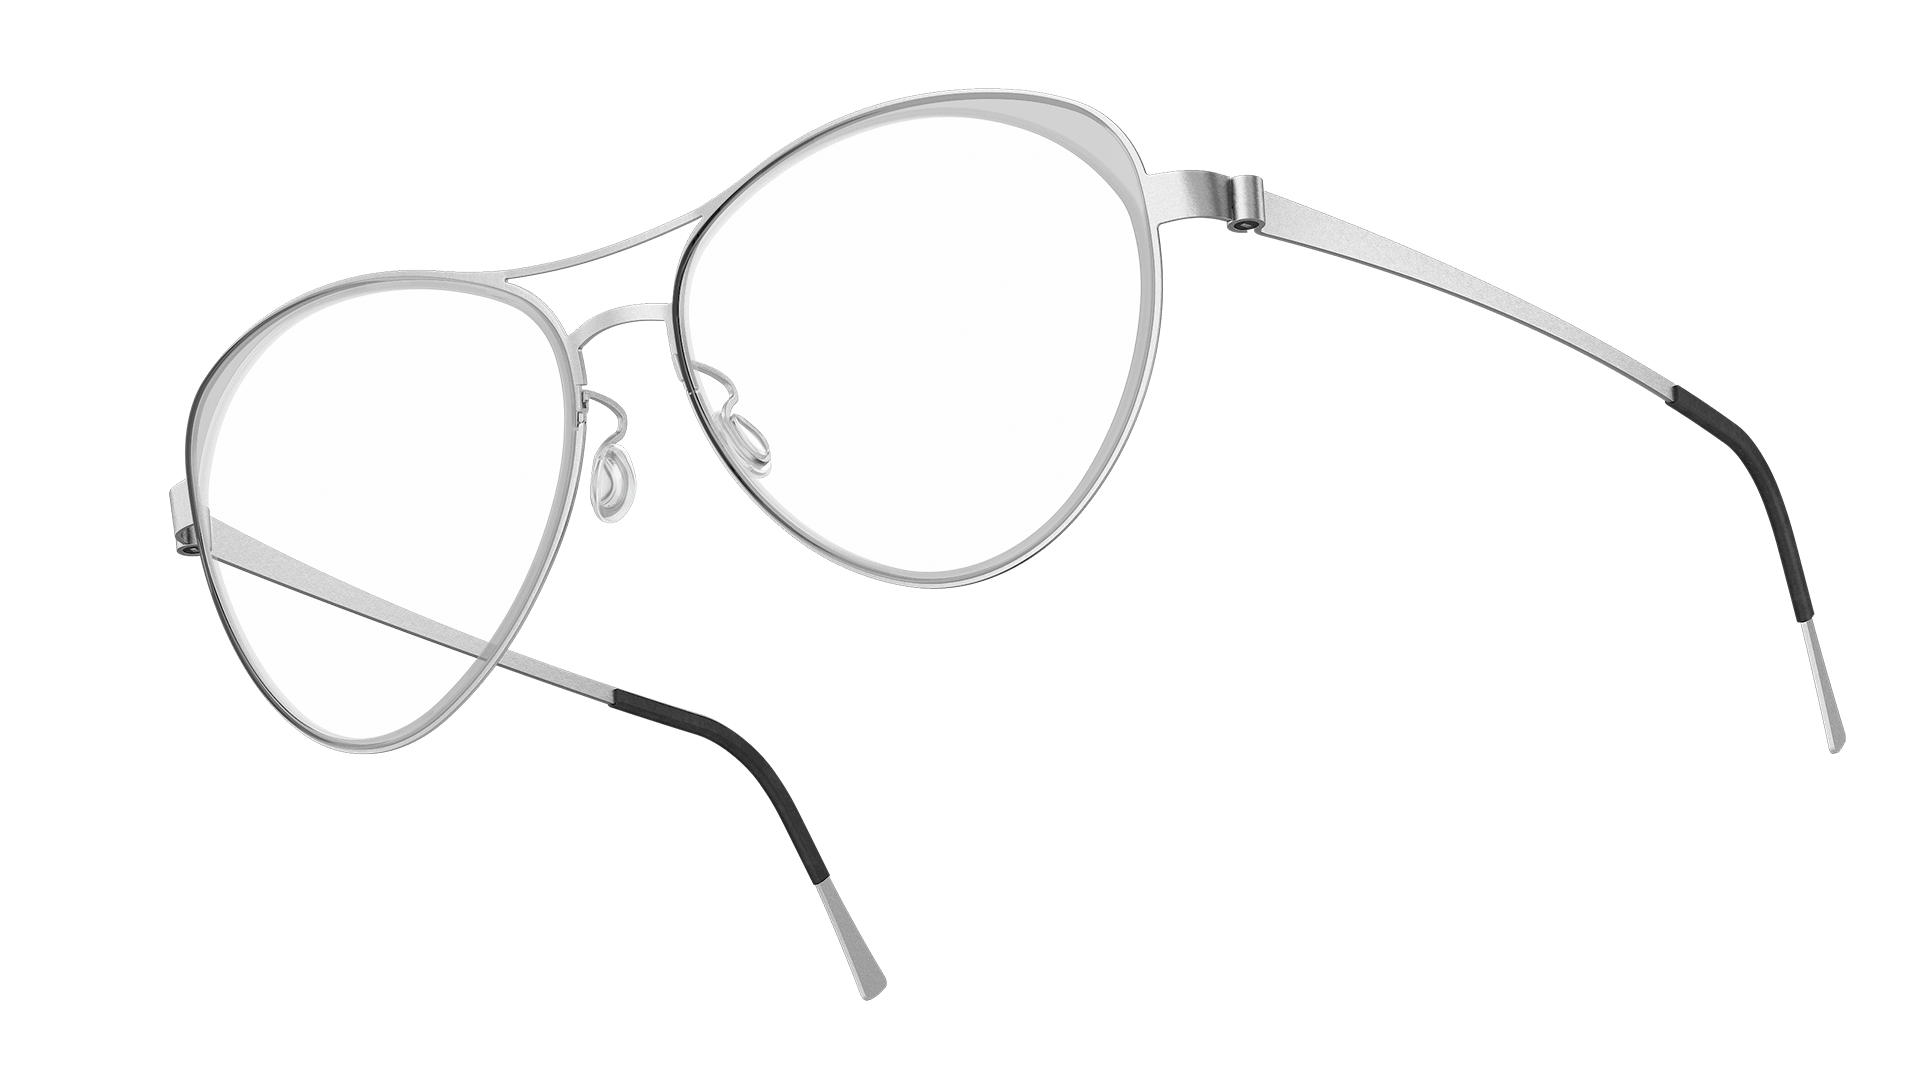 LINDBERG strip Model 9746 silver titanium glasses with grey inner acetate rim in a butterfly shape